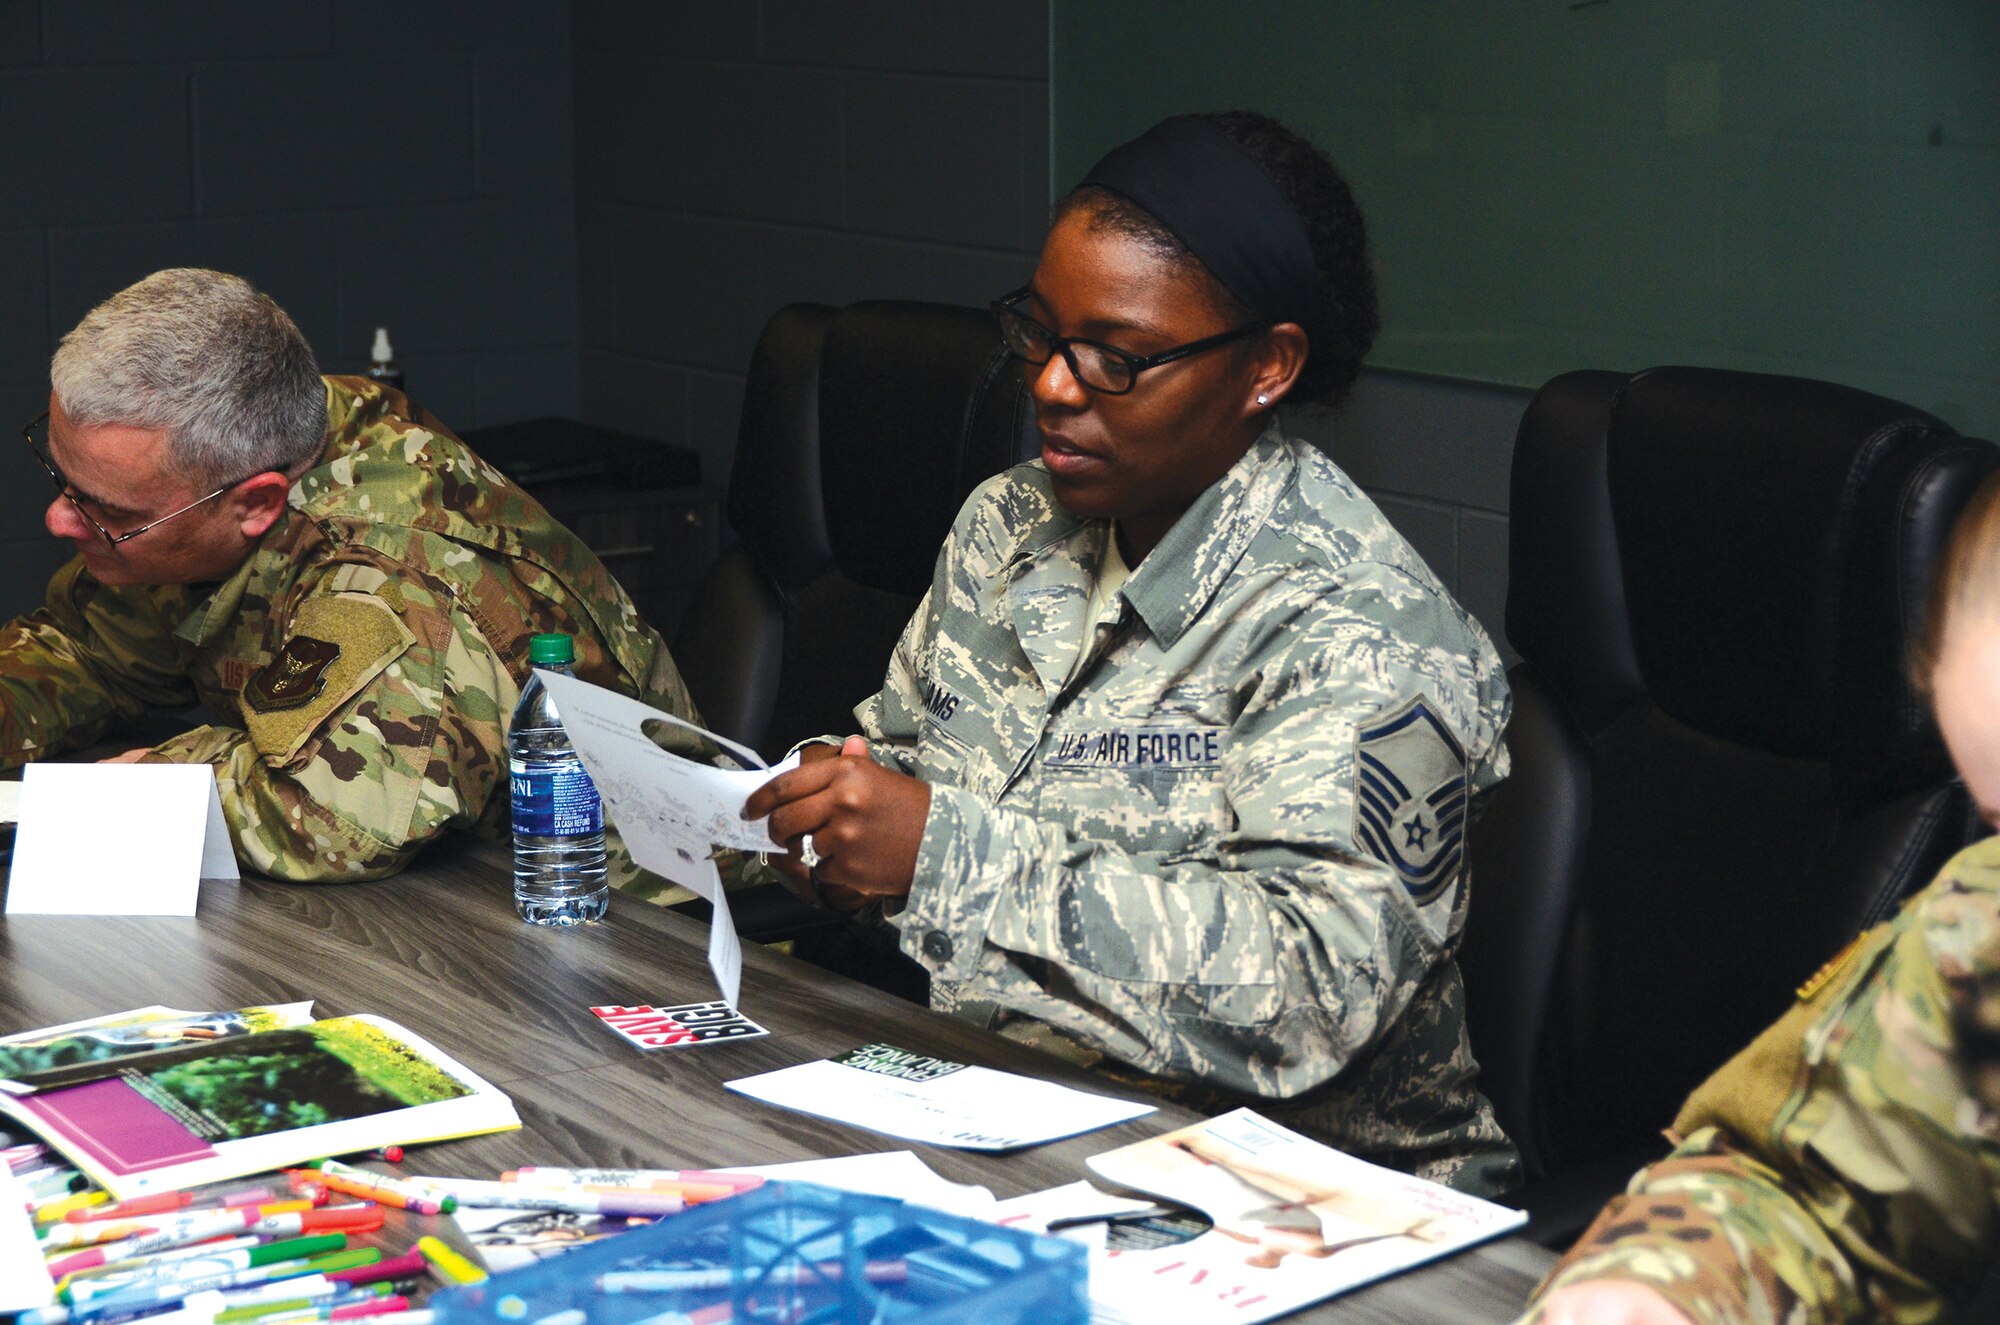 Master Sgts. Daniel Lewis and Sierra Williams create vision boards during the 445th Force Support Squadron Tactical Pause Day Nov. 3, 2019.